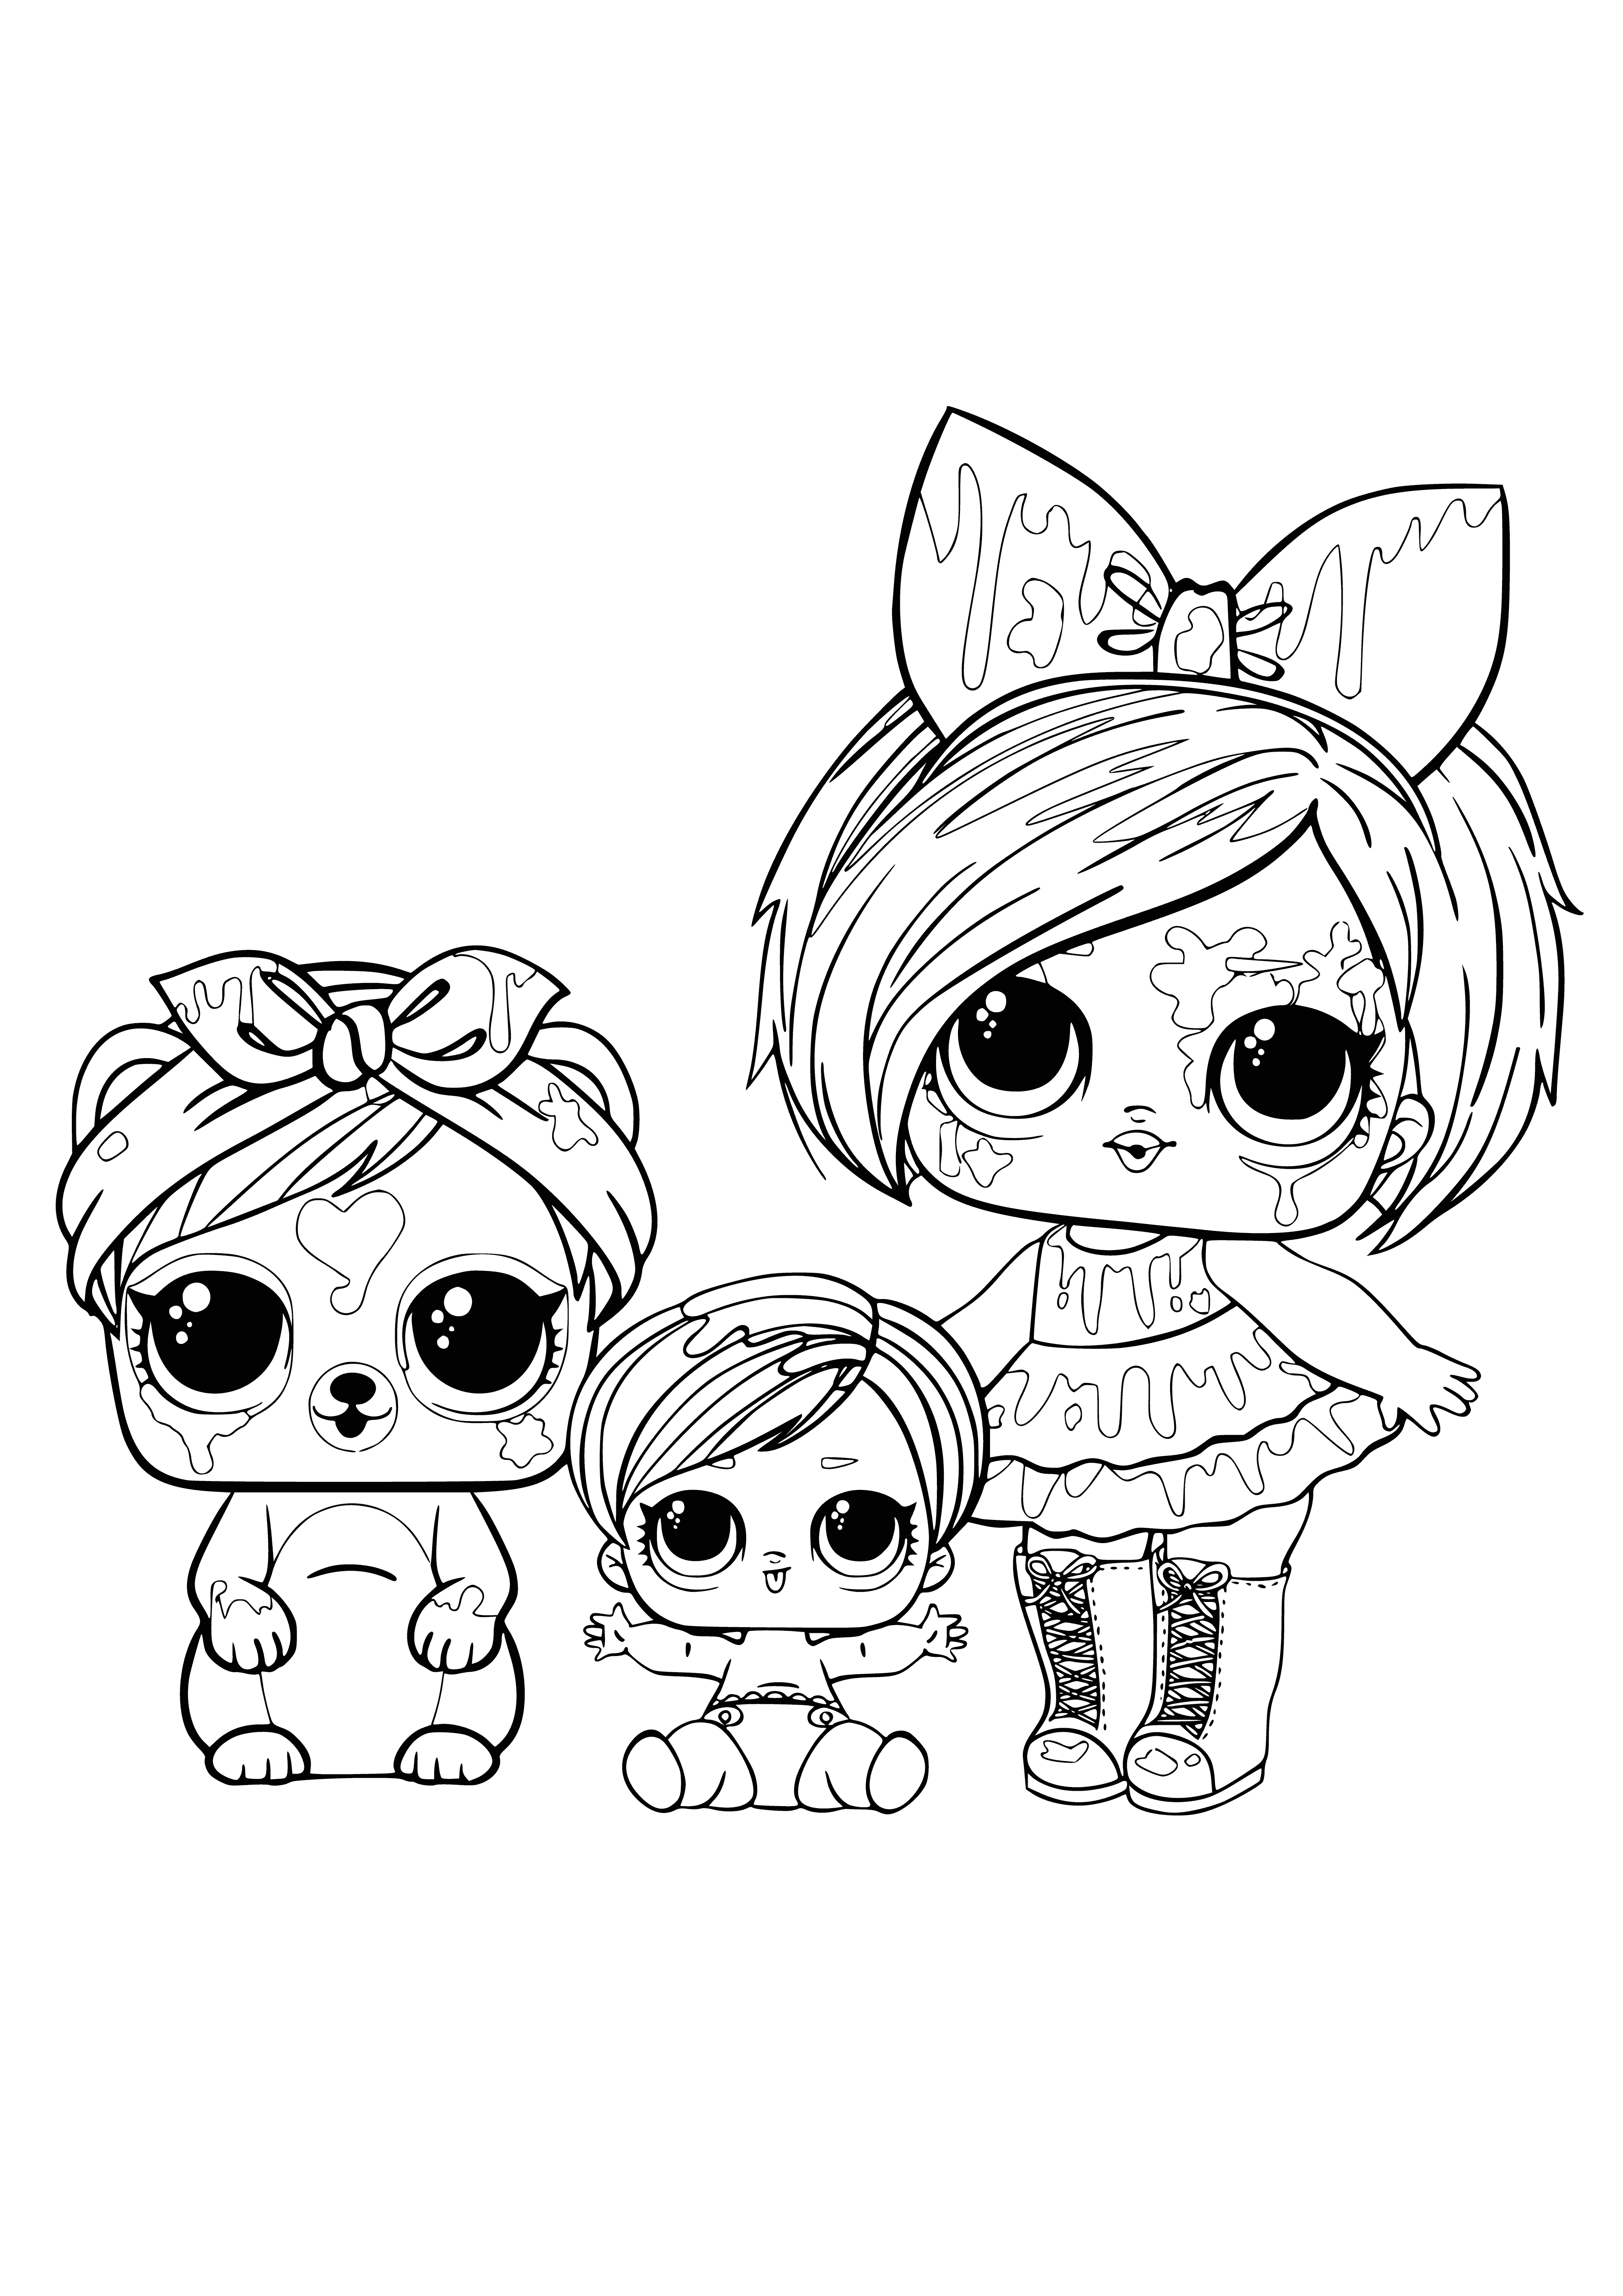 coloring page: A LOL Spray bottle featuring a laughing baby and curious pet.